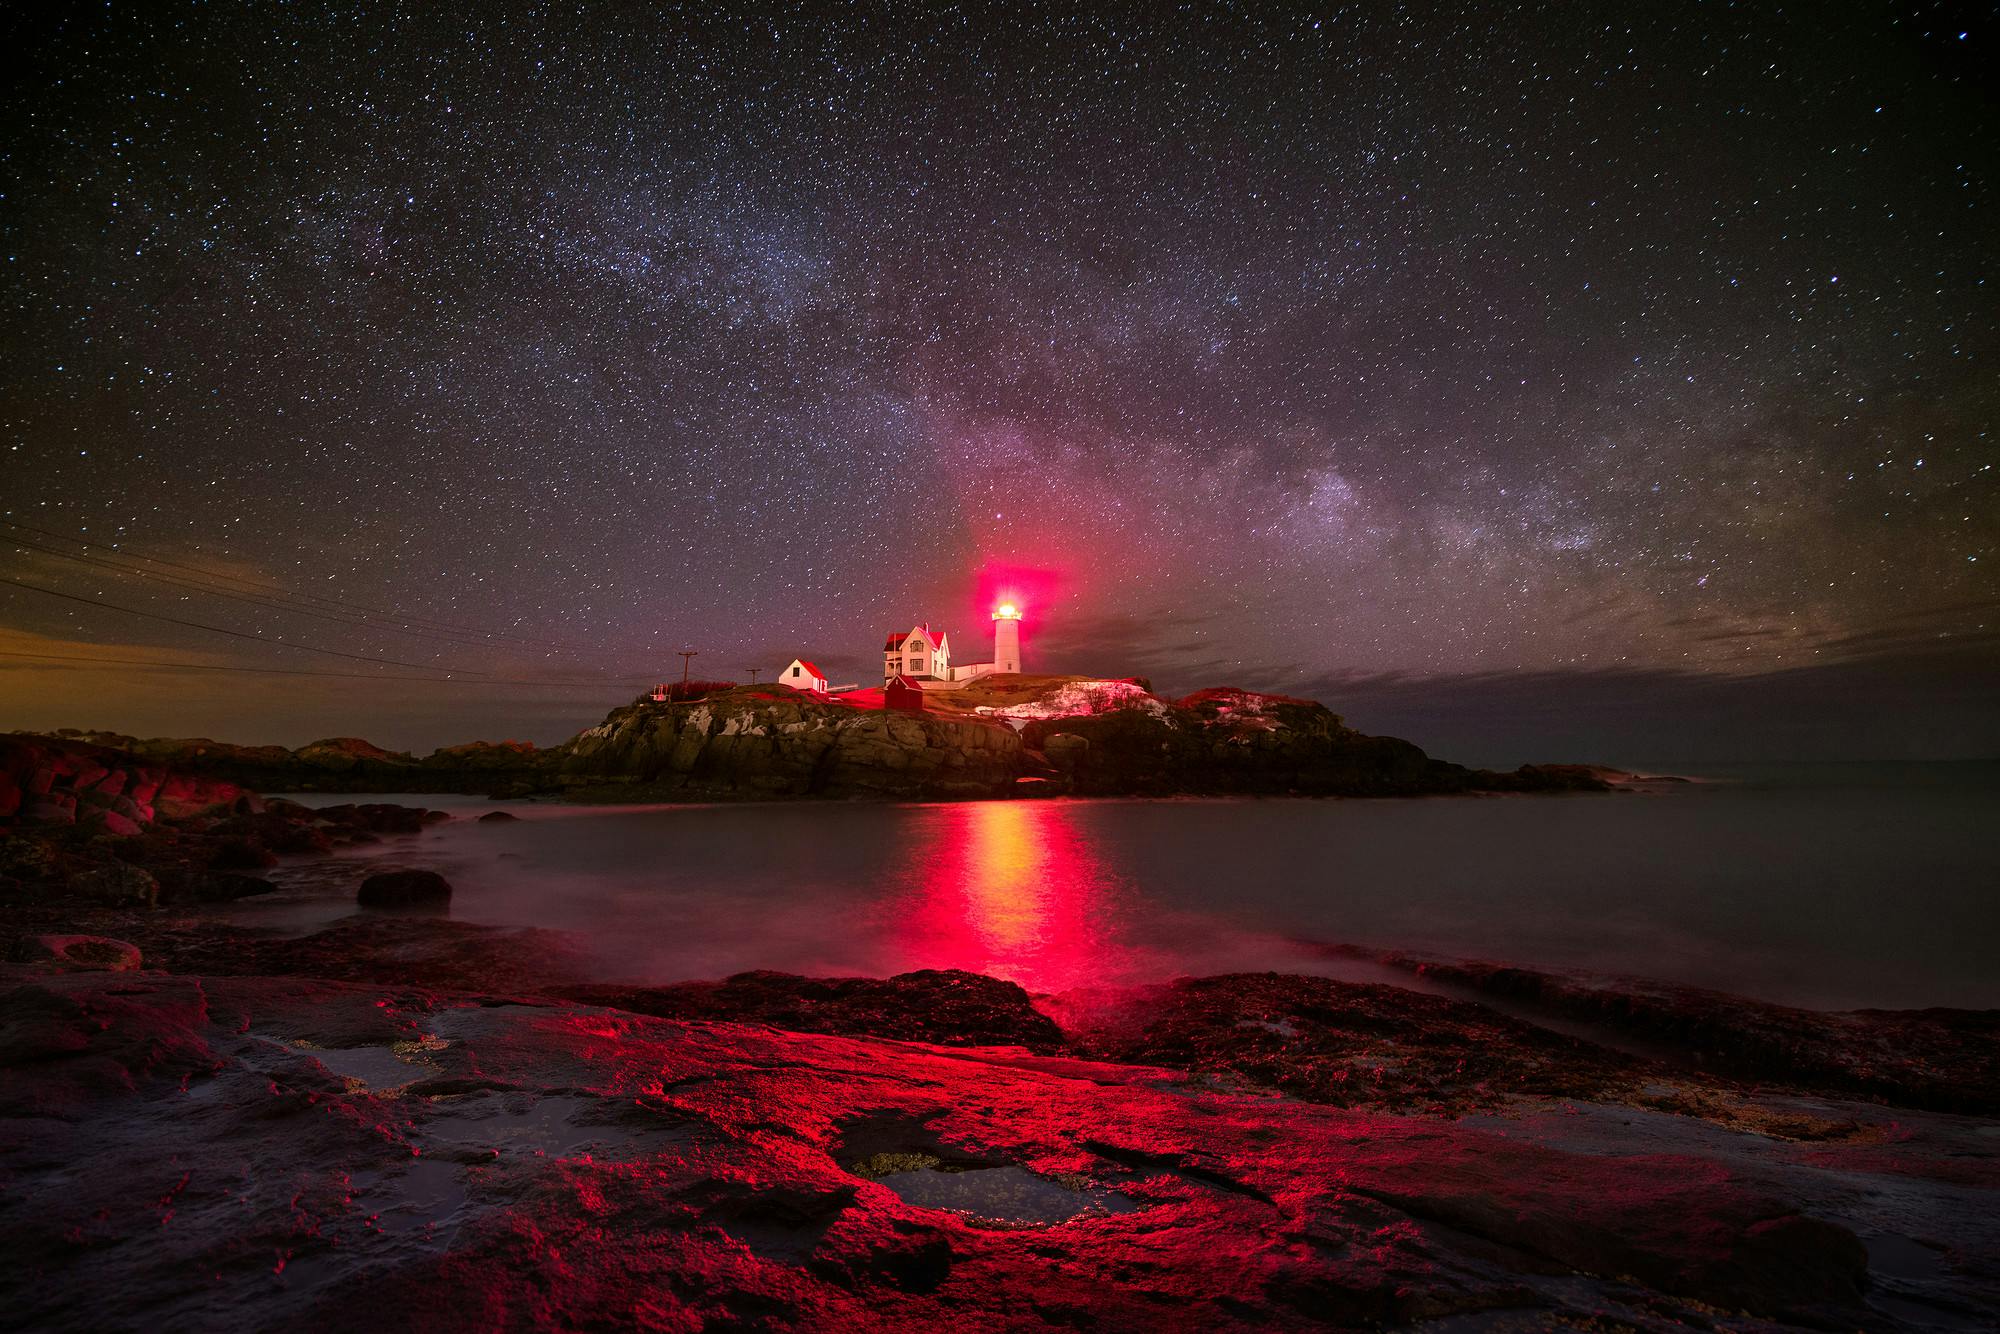 Milky Way Over Nubble Lighthouse